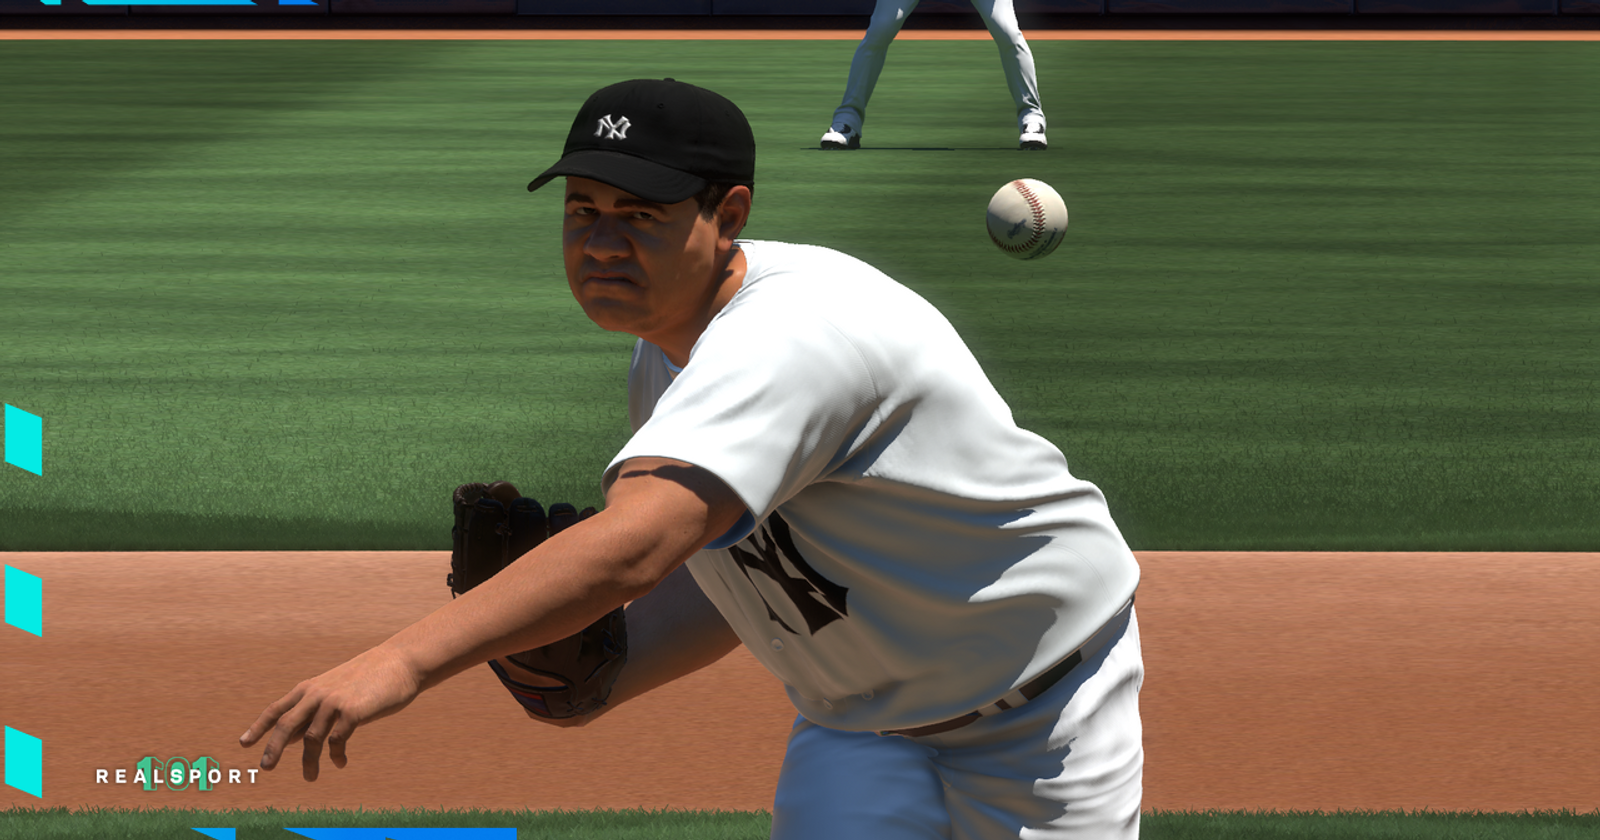 MLB The Show 21 Ratings: Highest Rated Legends - 99 OVR Legends Roster with  Cy Young, Babe Ruth, Jackie Robinson & more